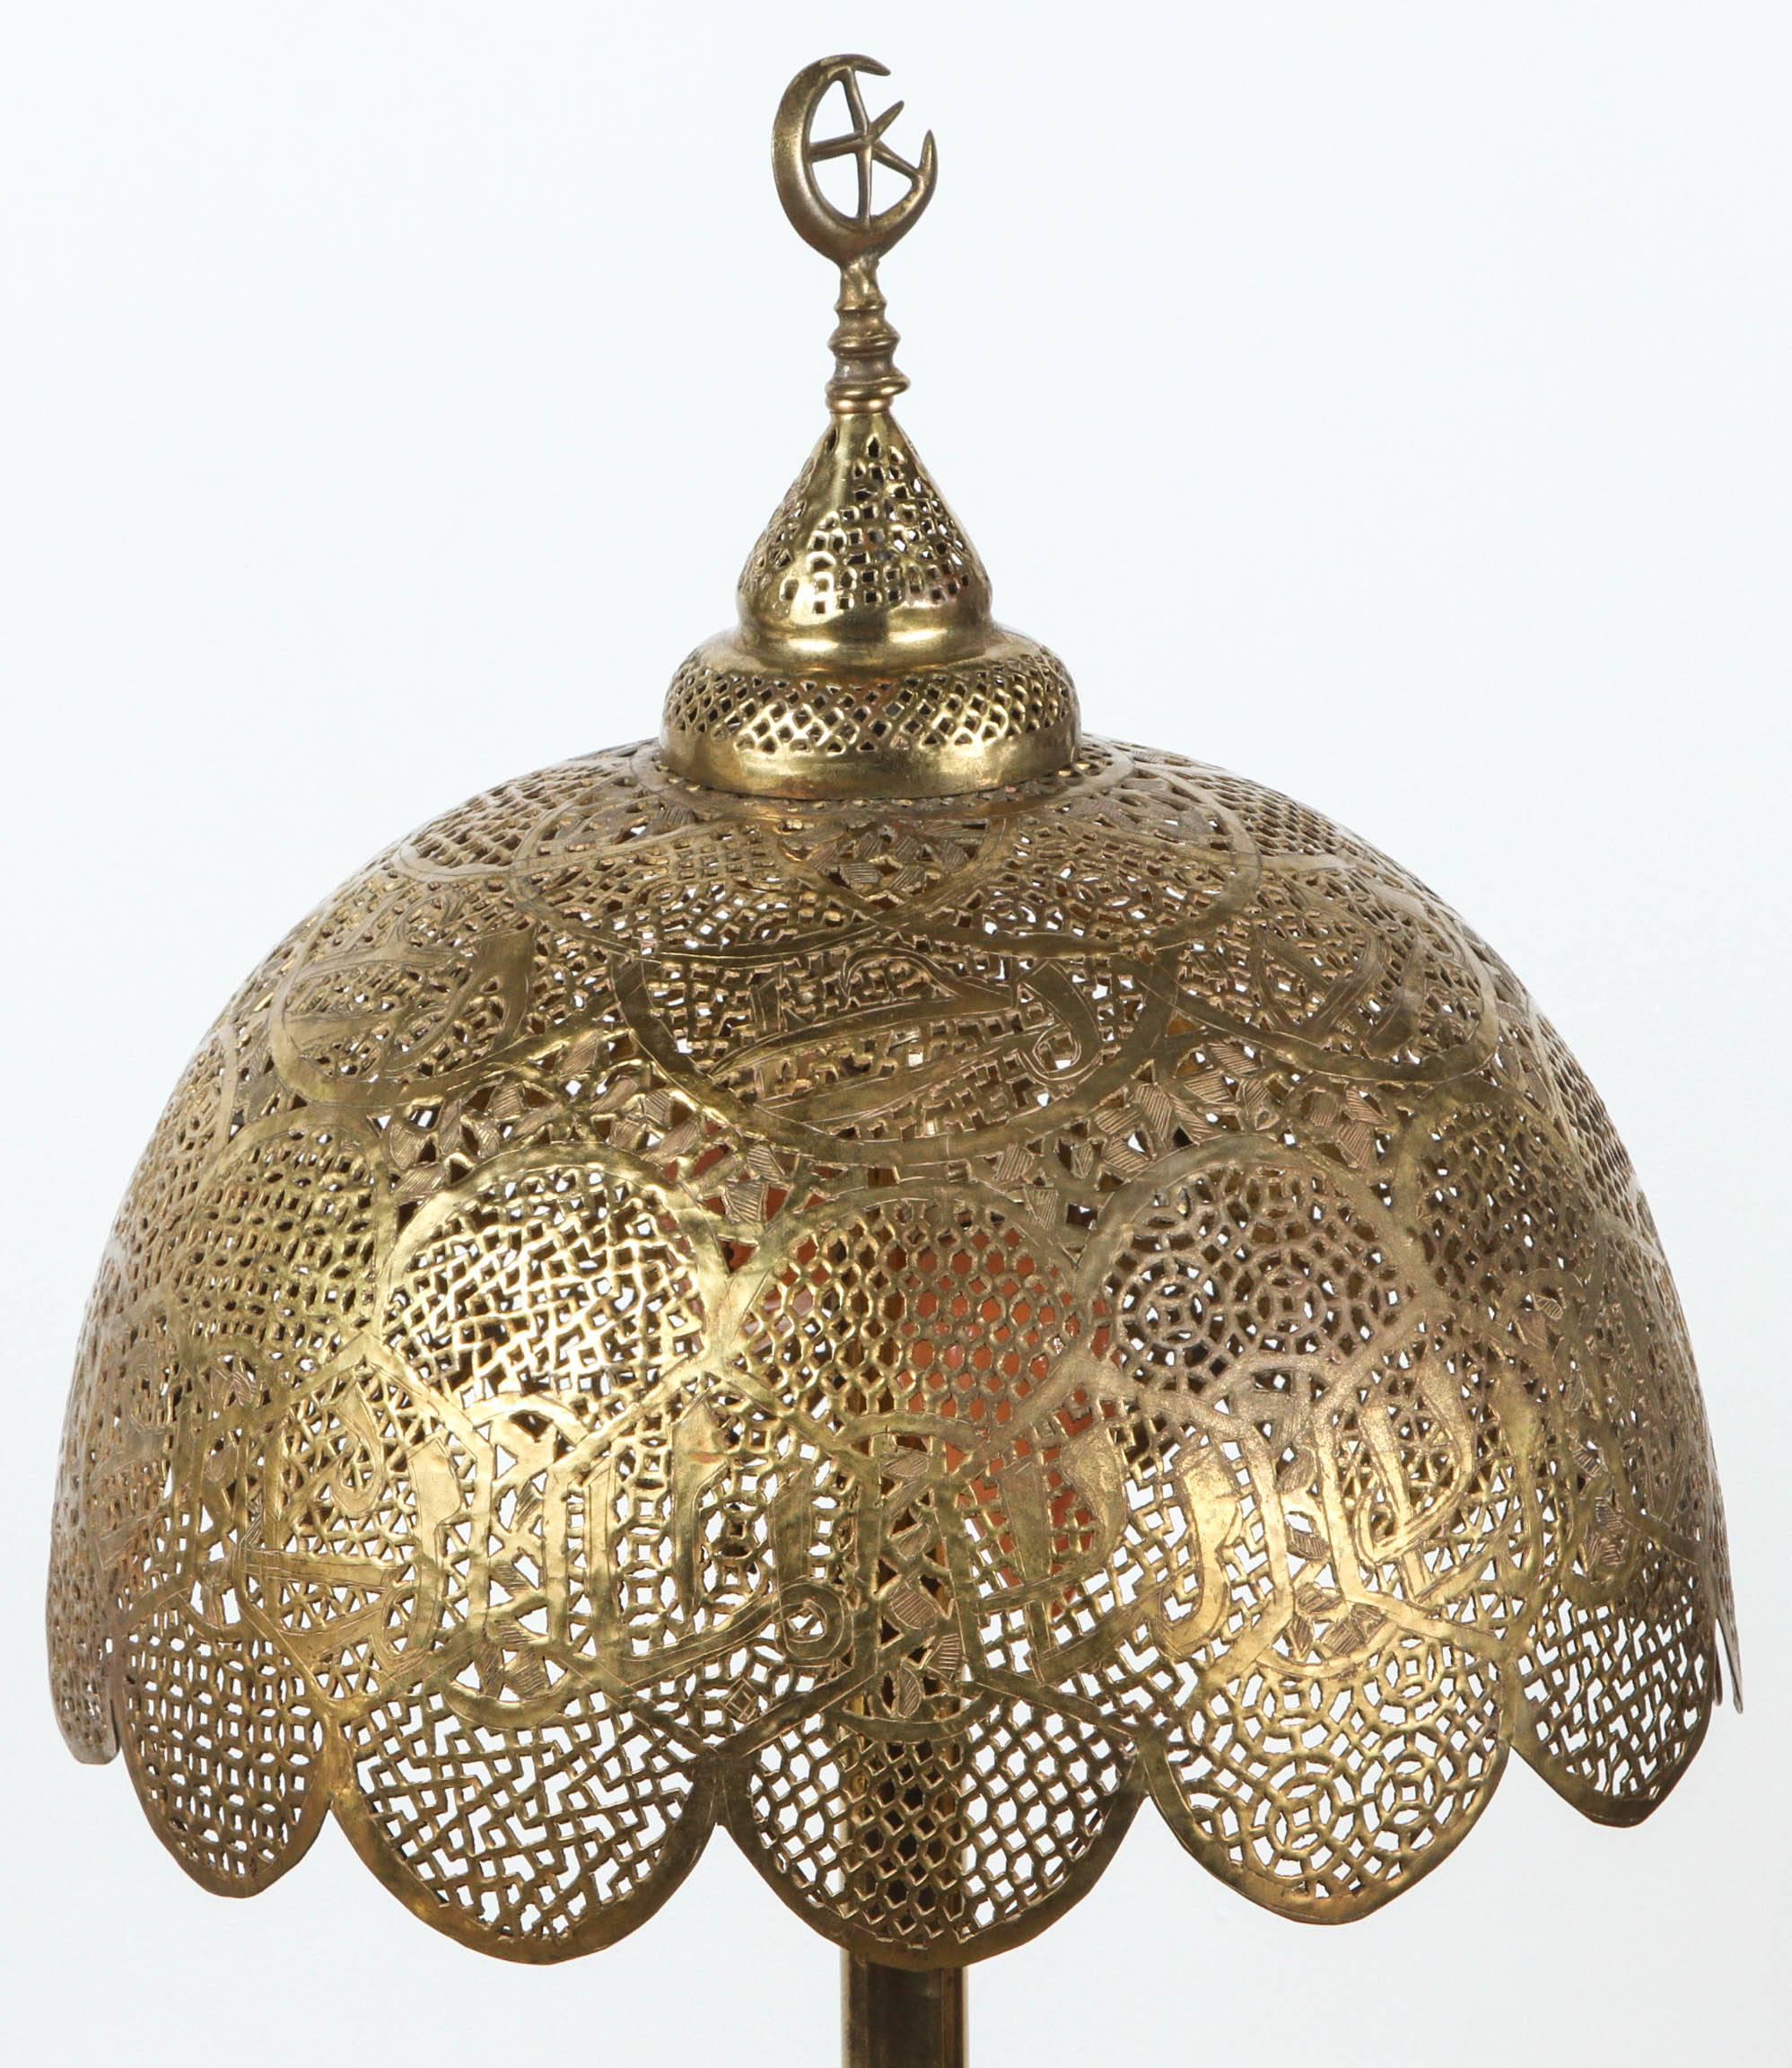 Middle Eastern Syrian Moorish Revival with Arabic calligraphy.
Moorish Revival Syrian brass table lamp with pierced filigree brass stand and shade and surmounted by the moon and star. 
Handcrafted in Syria, there is a light in the bottom and two